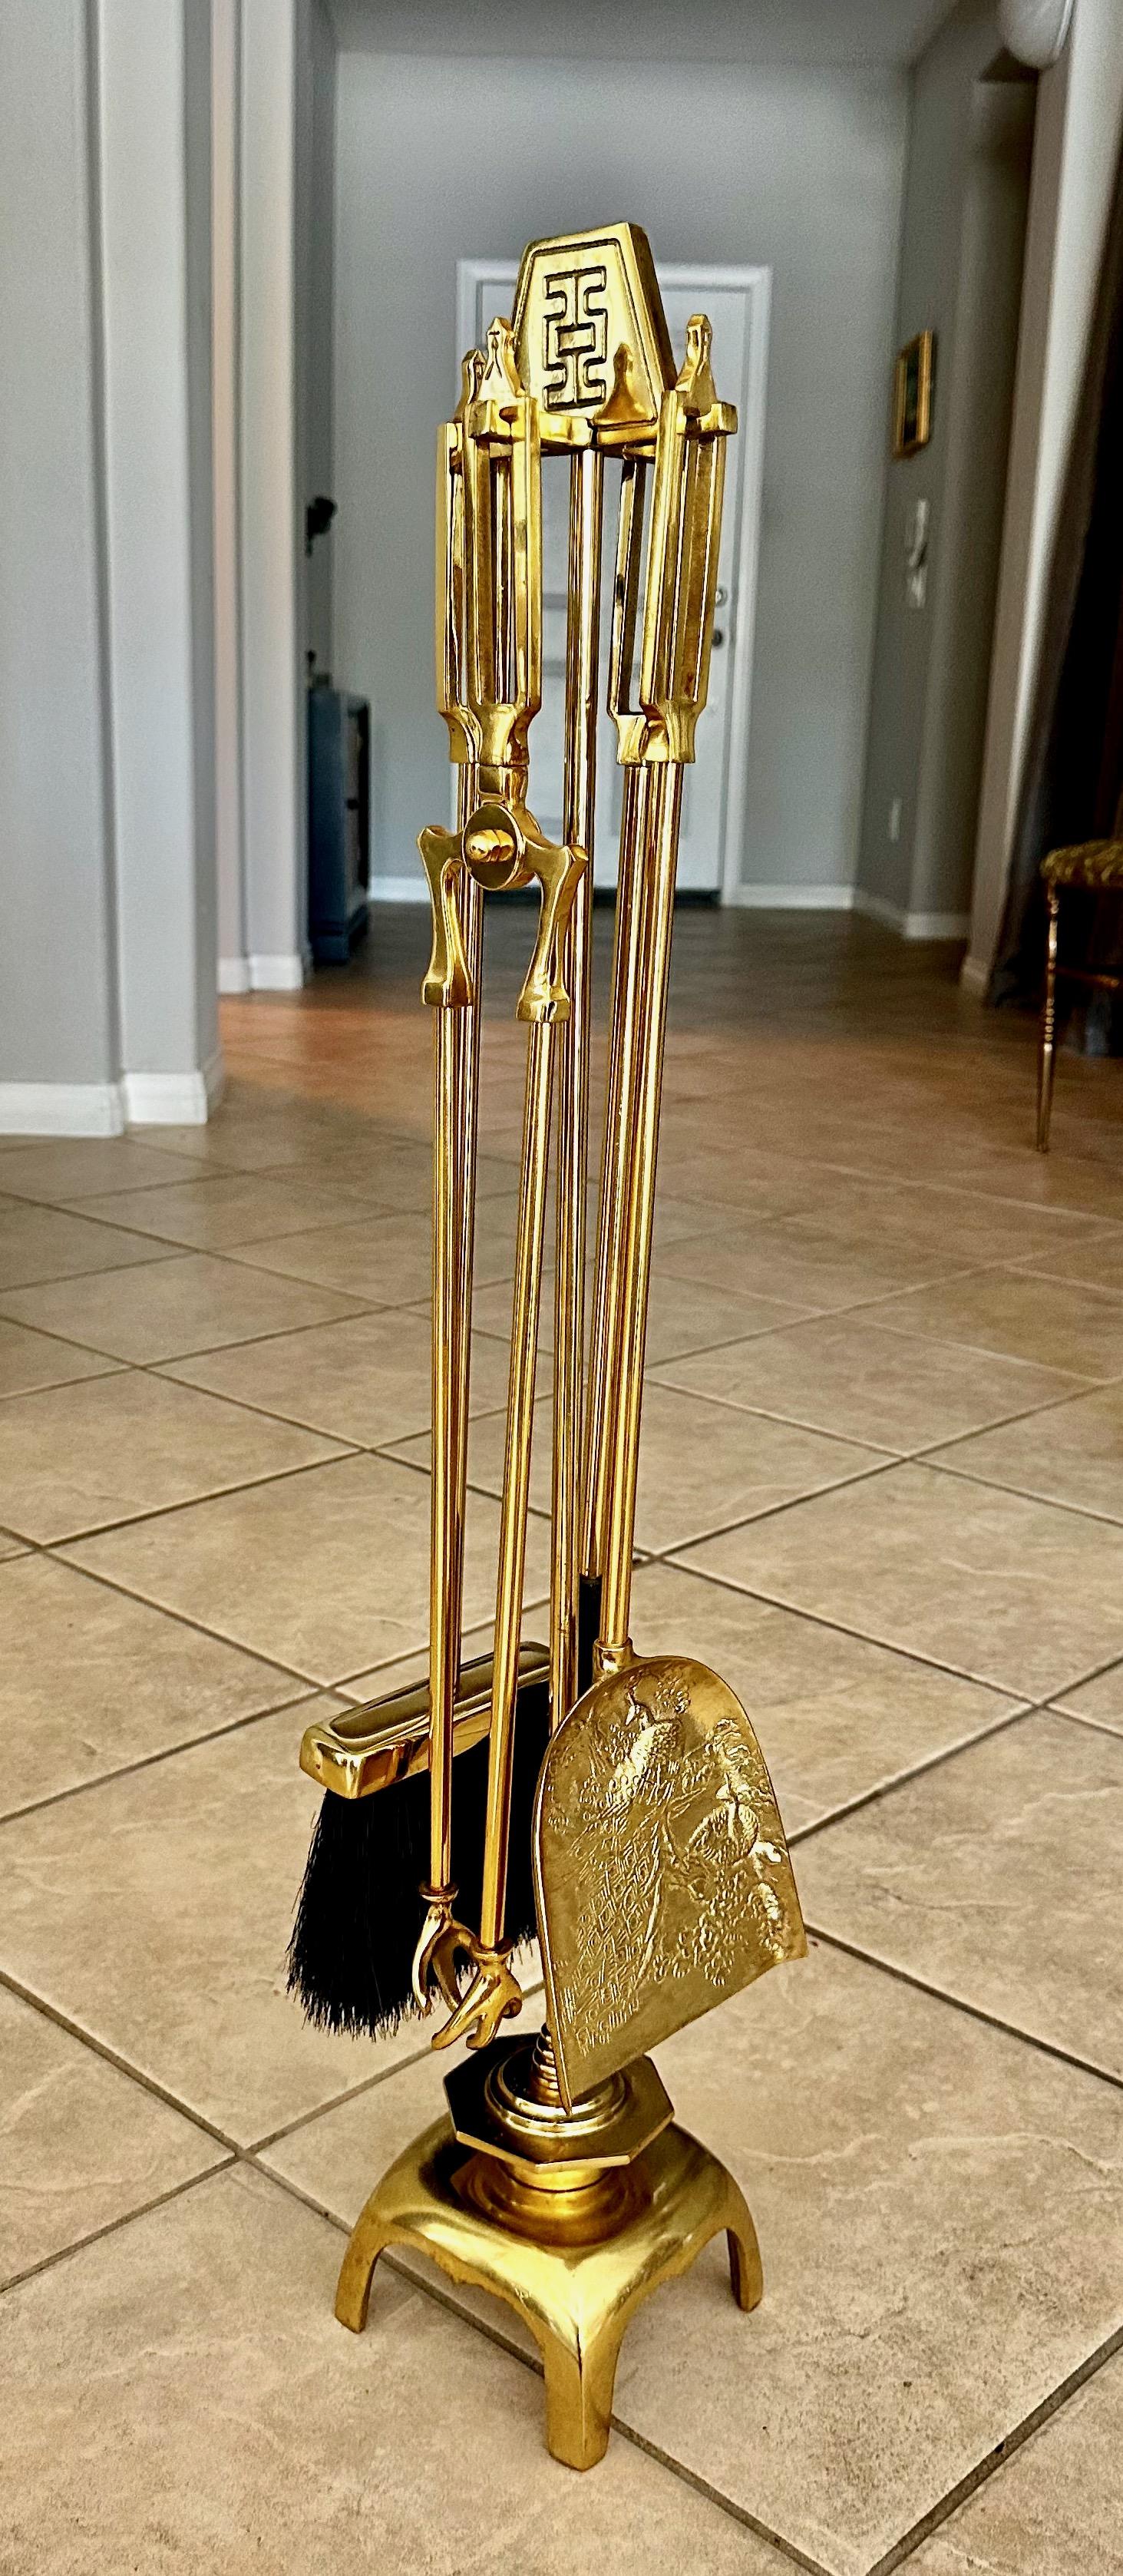 Mid century James Mont style Asian inspired motif 5-piece fireplace tool set. Heavy high quality cast brass with intricate detail design on shovel. Included are the stand, the poker, shovel, broom and tongs. The stand measures approximately 31